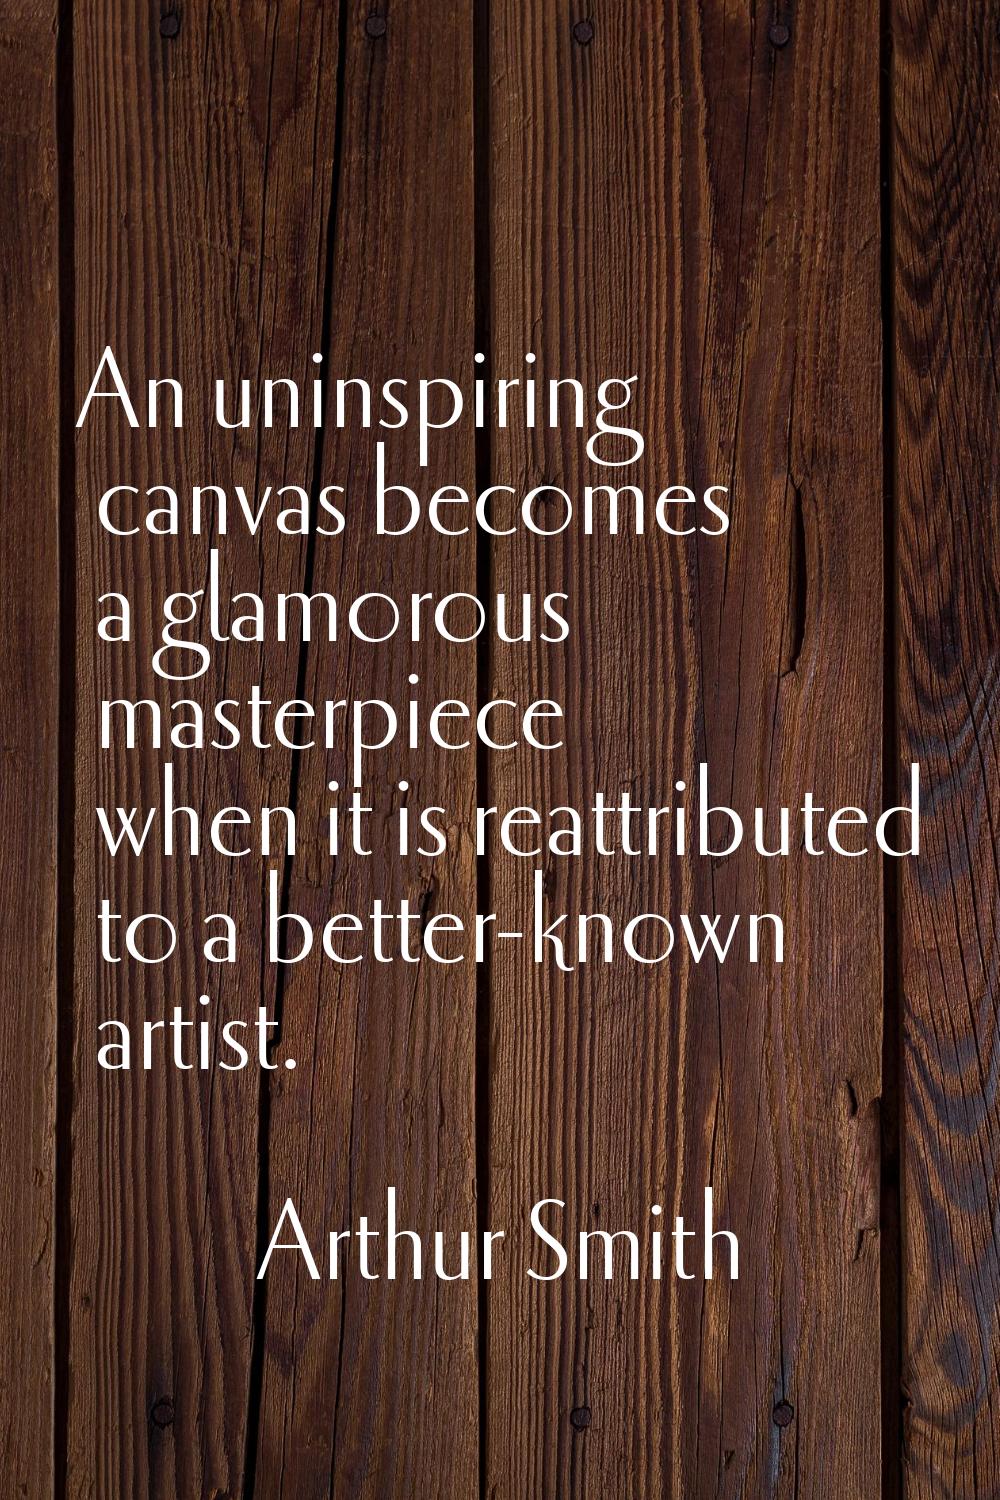 An uninspiring canvas becomes a glamorous masterpiece when it is reattributed to a better-known art